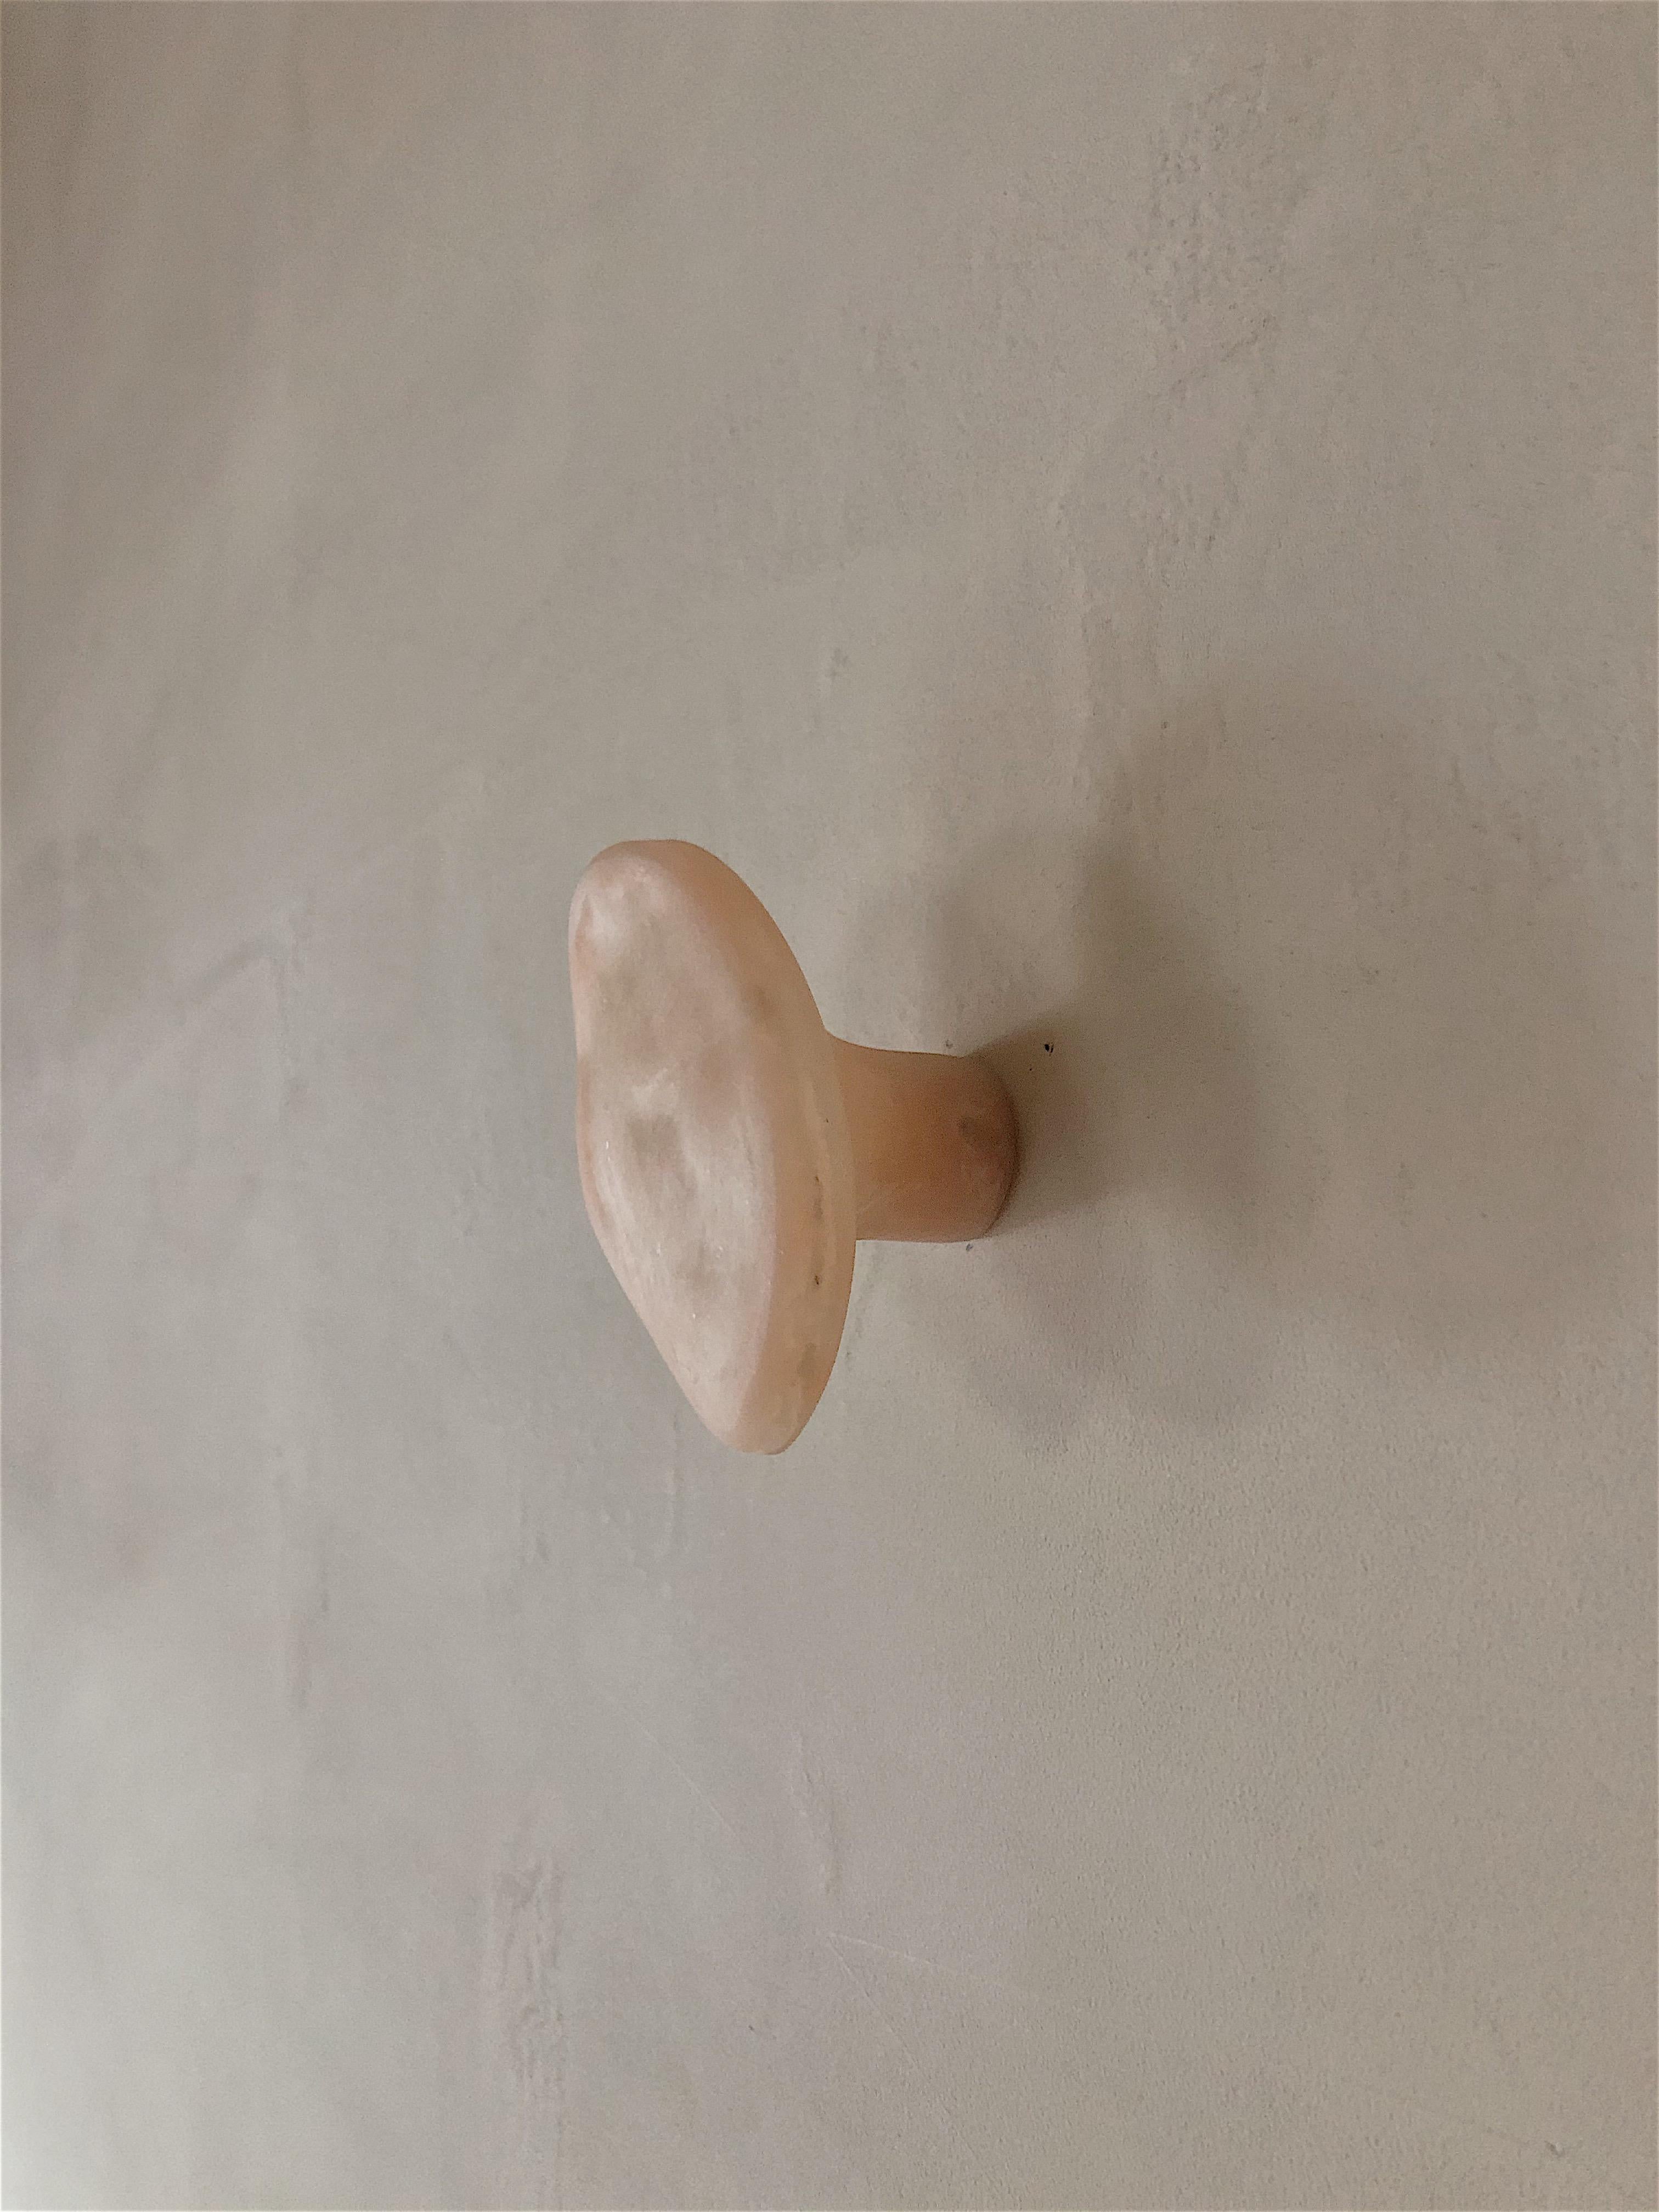 Rose cobble hook by Karstudio
Dimensions: W 6 x D 5.5 x H 1 cm
Materials: FRP
Other colours available.

Like a jade in the rough, it could be use as a hook or door handle, the hook with irregular lines brings fun to a monotonous line-straight